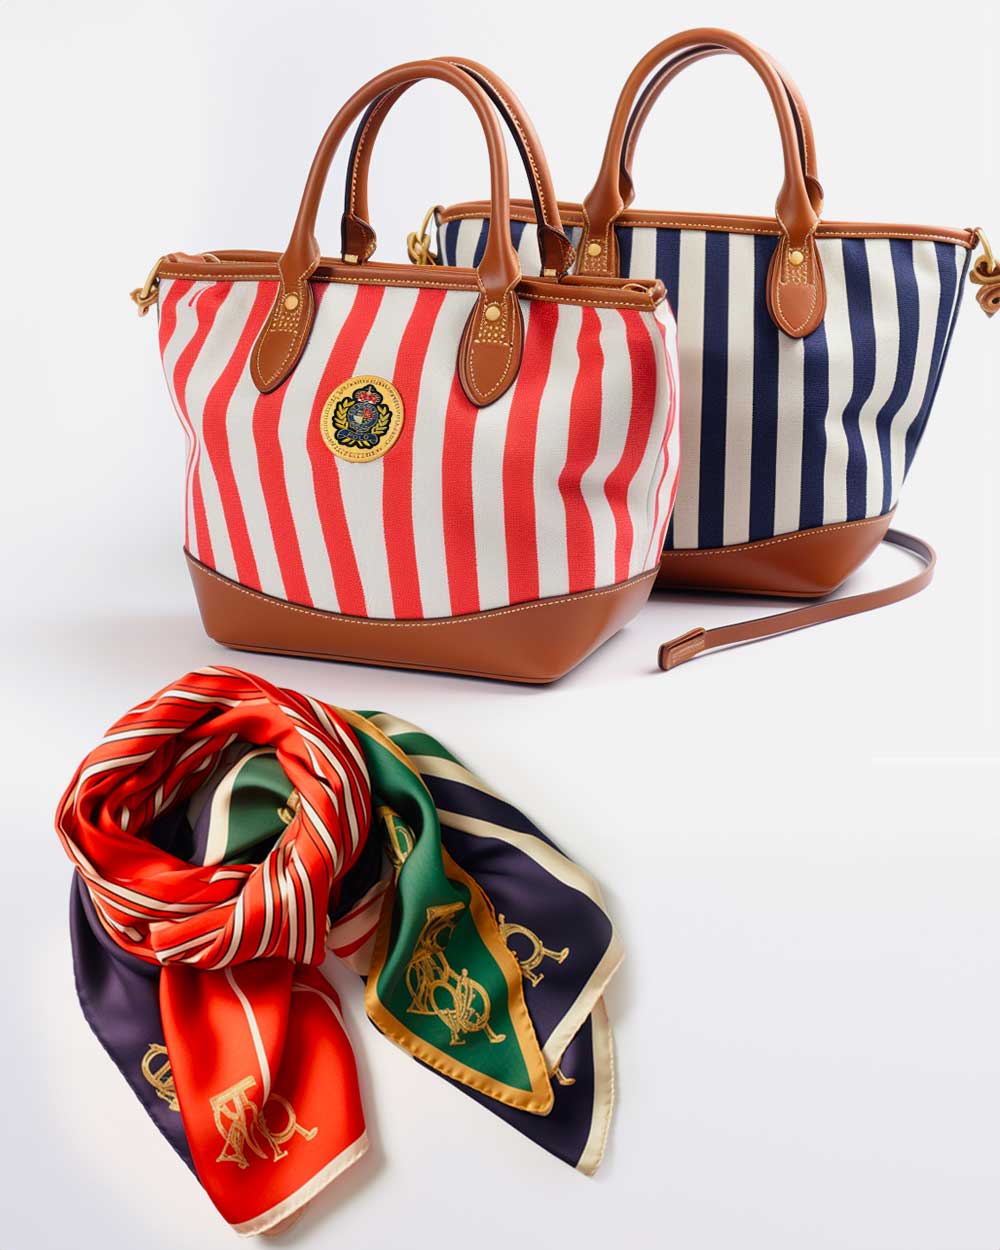 Preppy style monogrammed bags and scarves